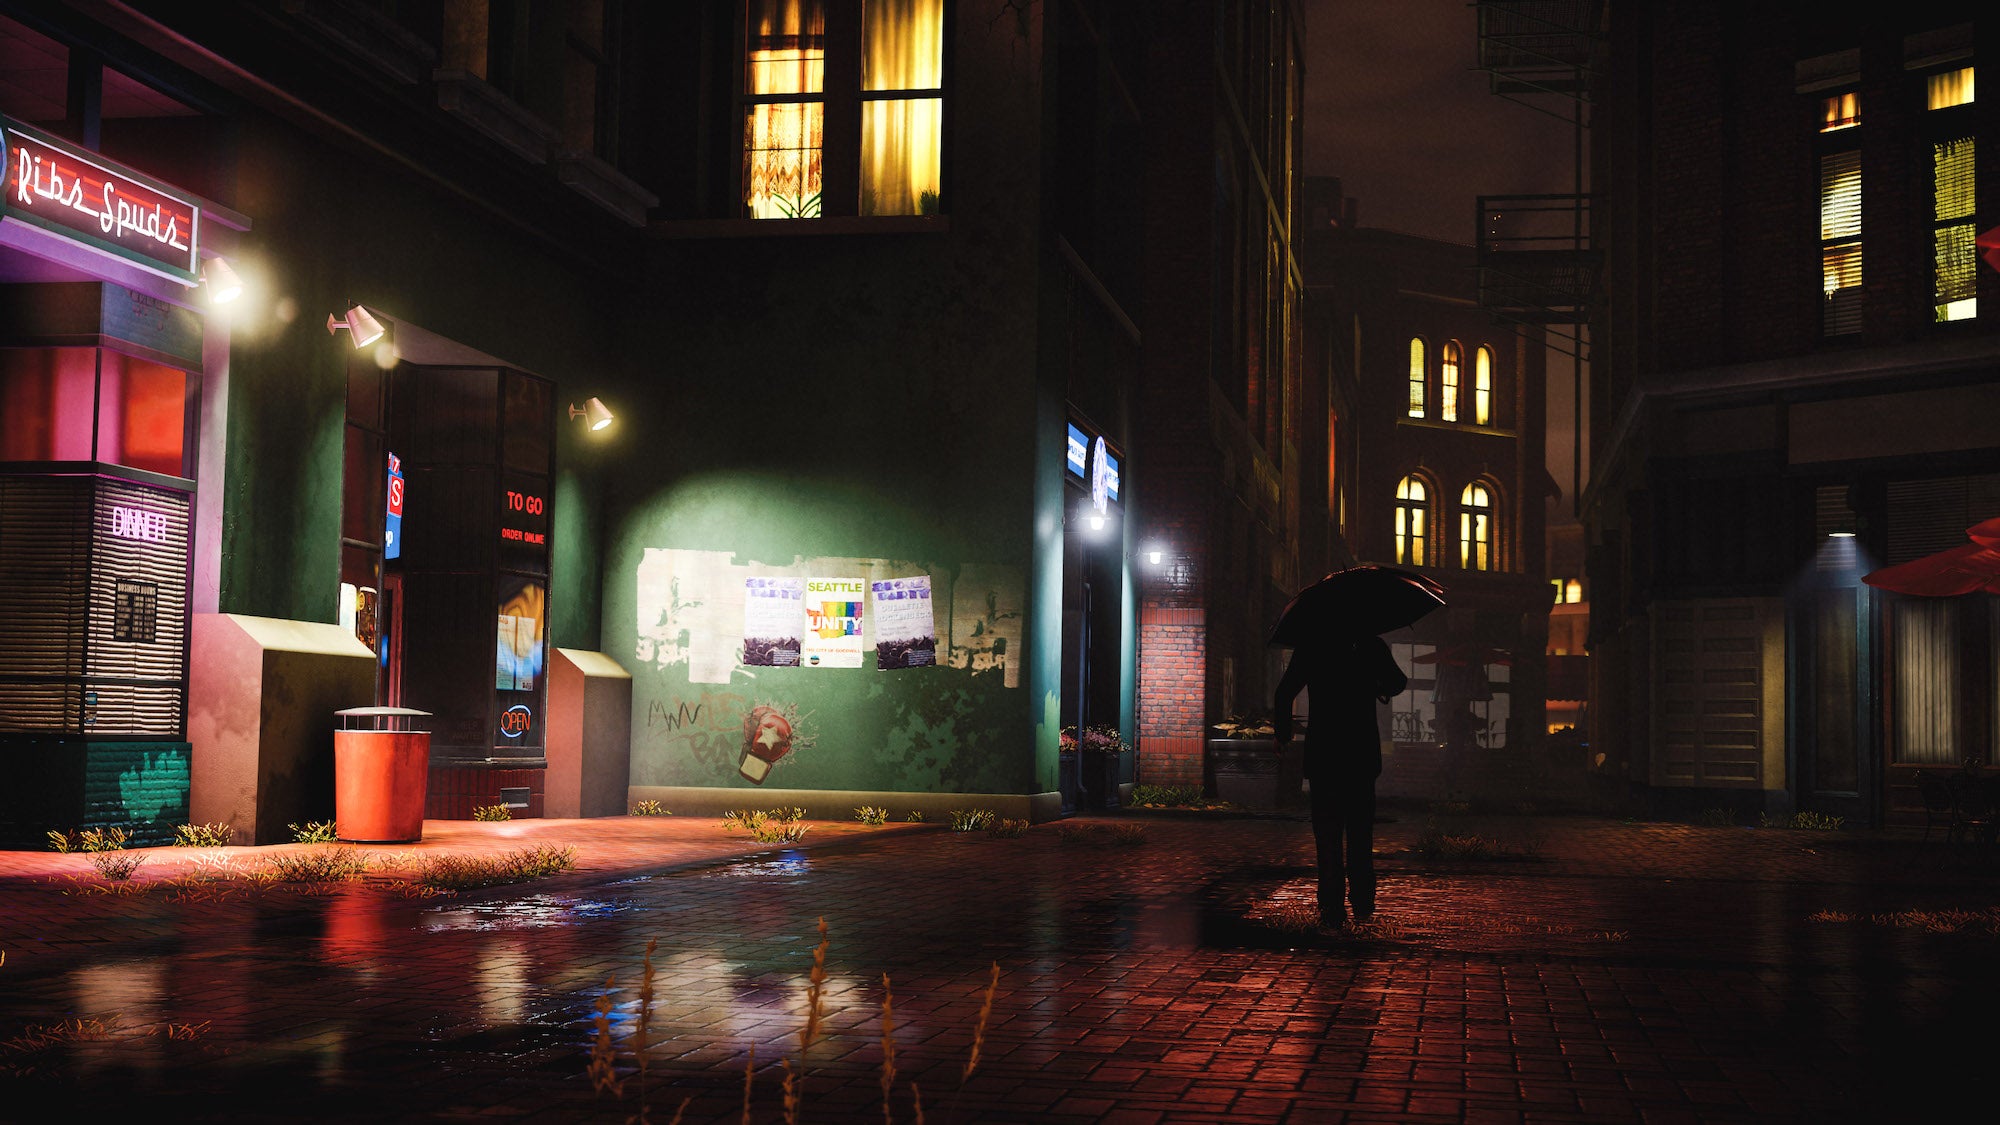 “Late Rain” – inFAMOUS First Light shot by TheFourthFocus